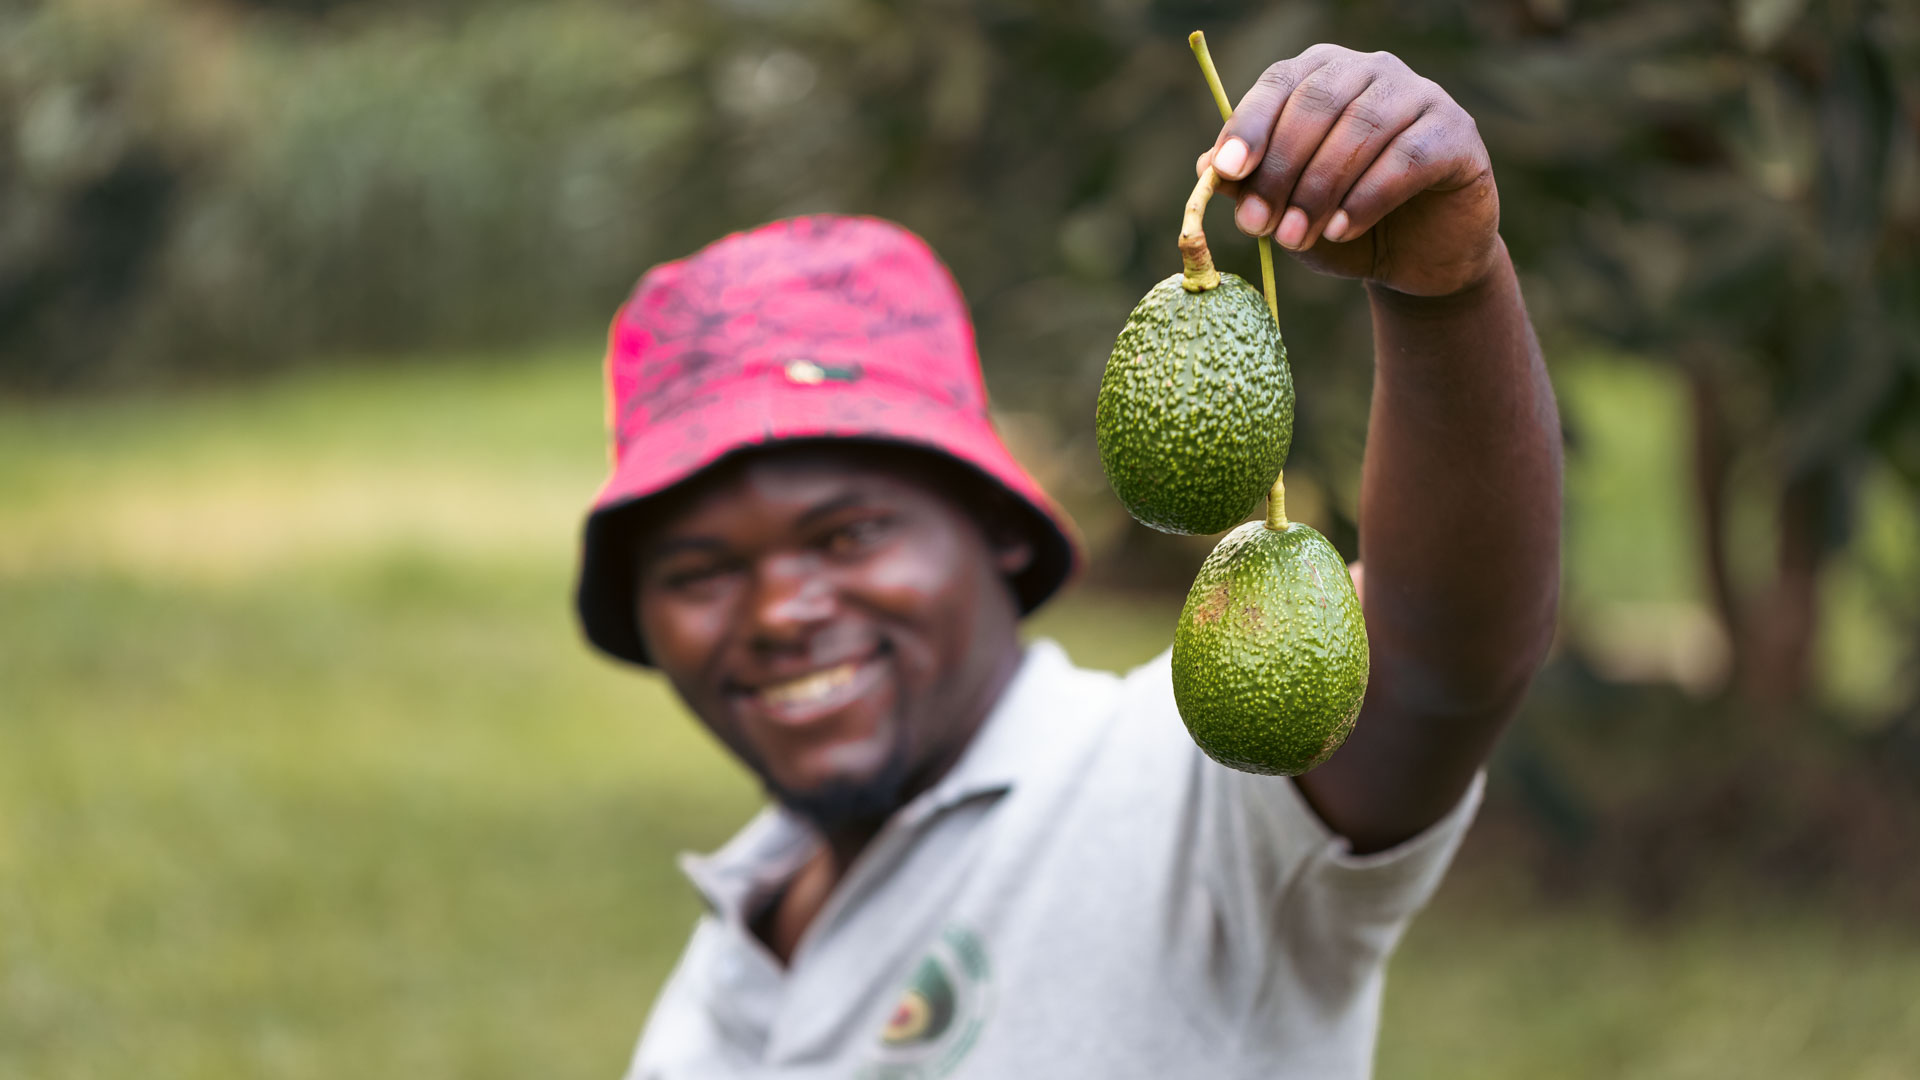 Another member of the team displaying a fresh harvest of avocados.